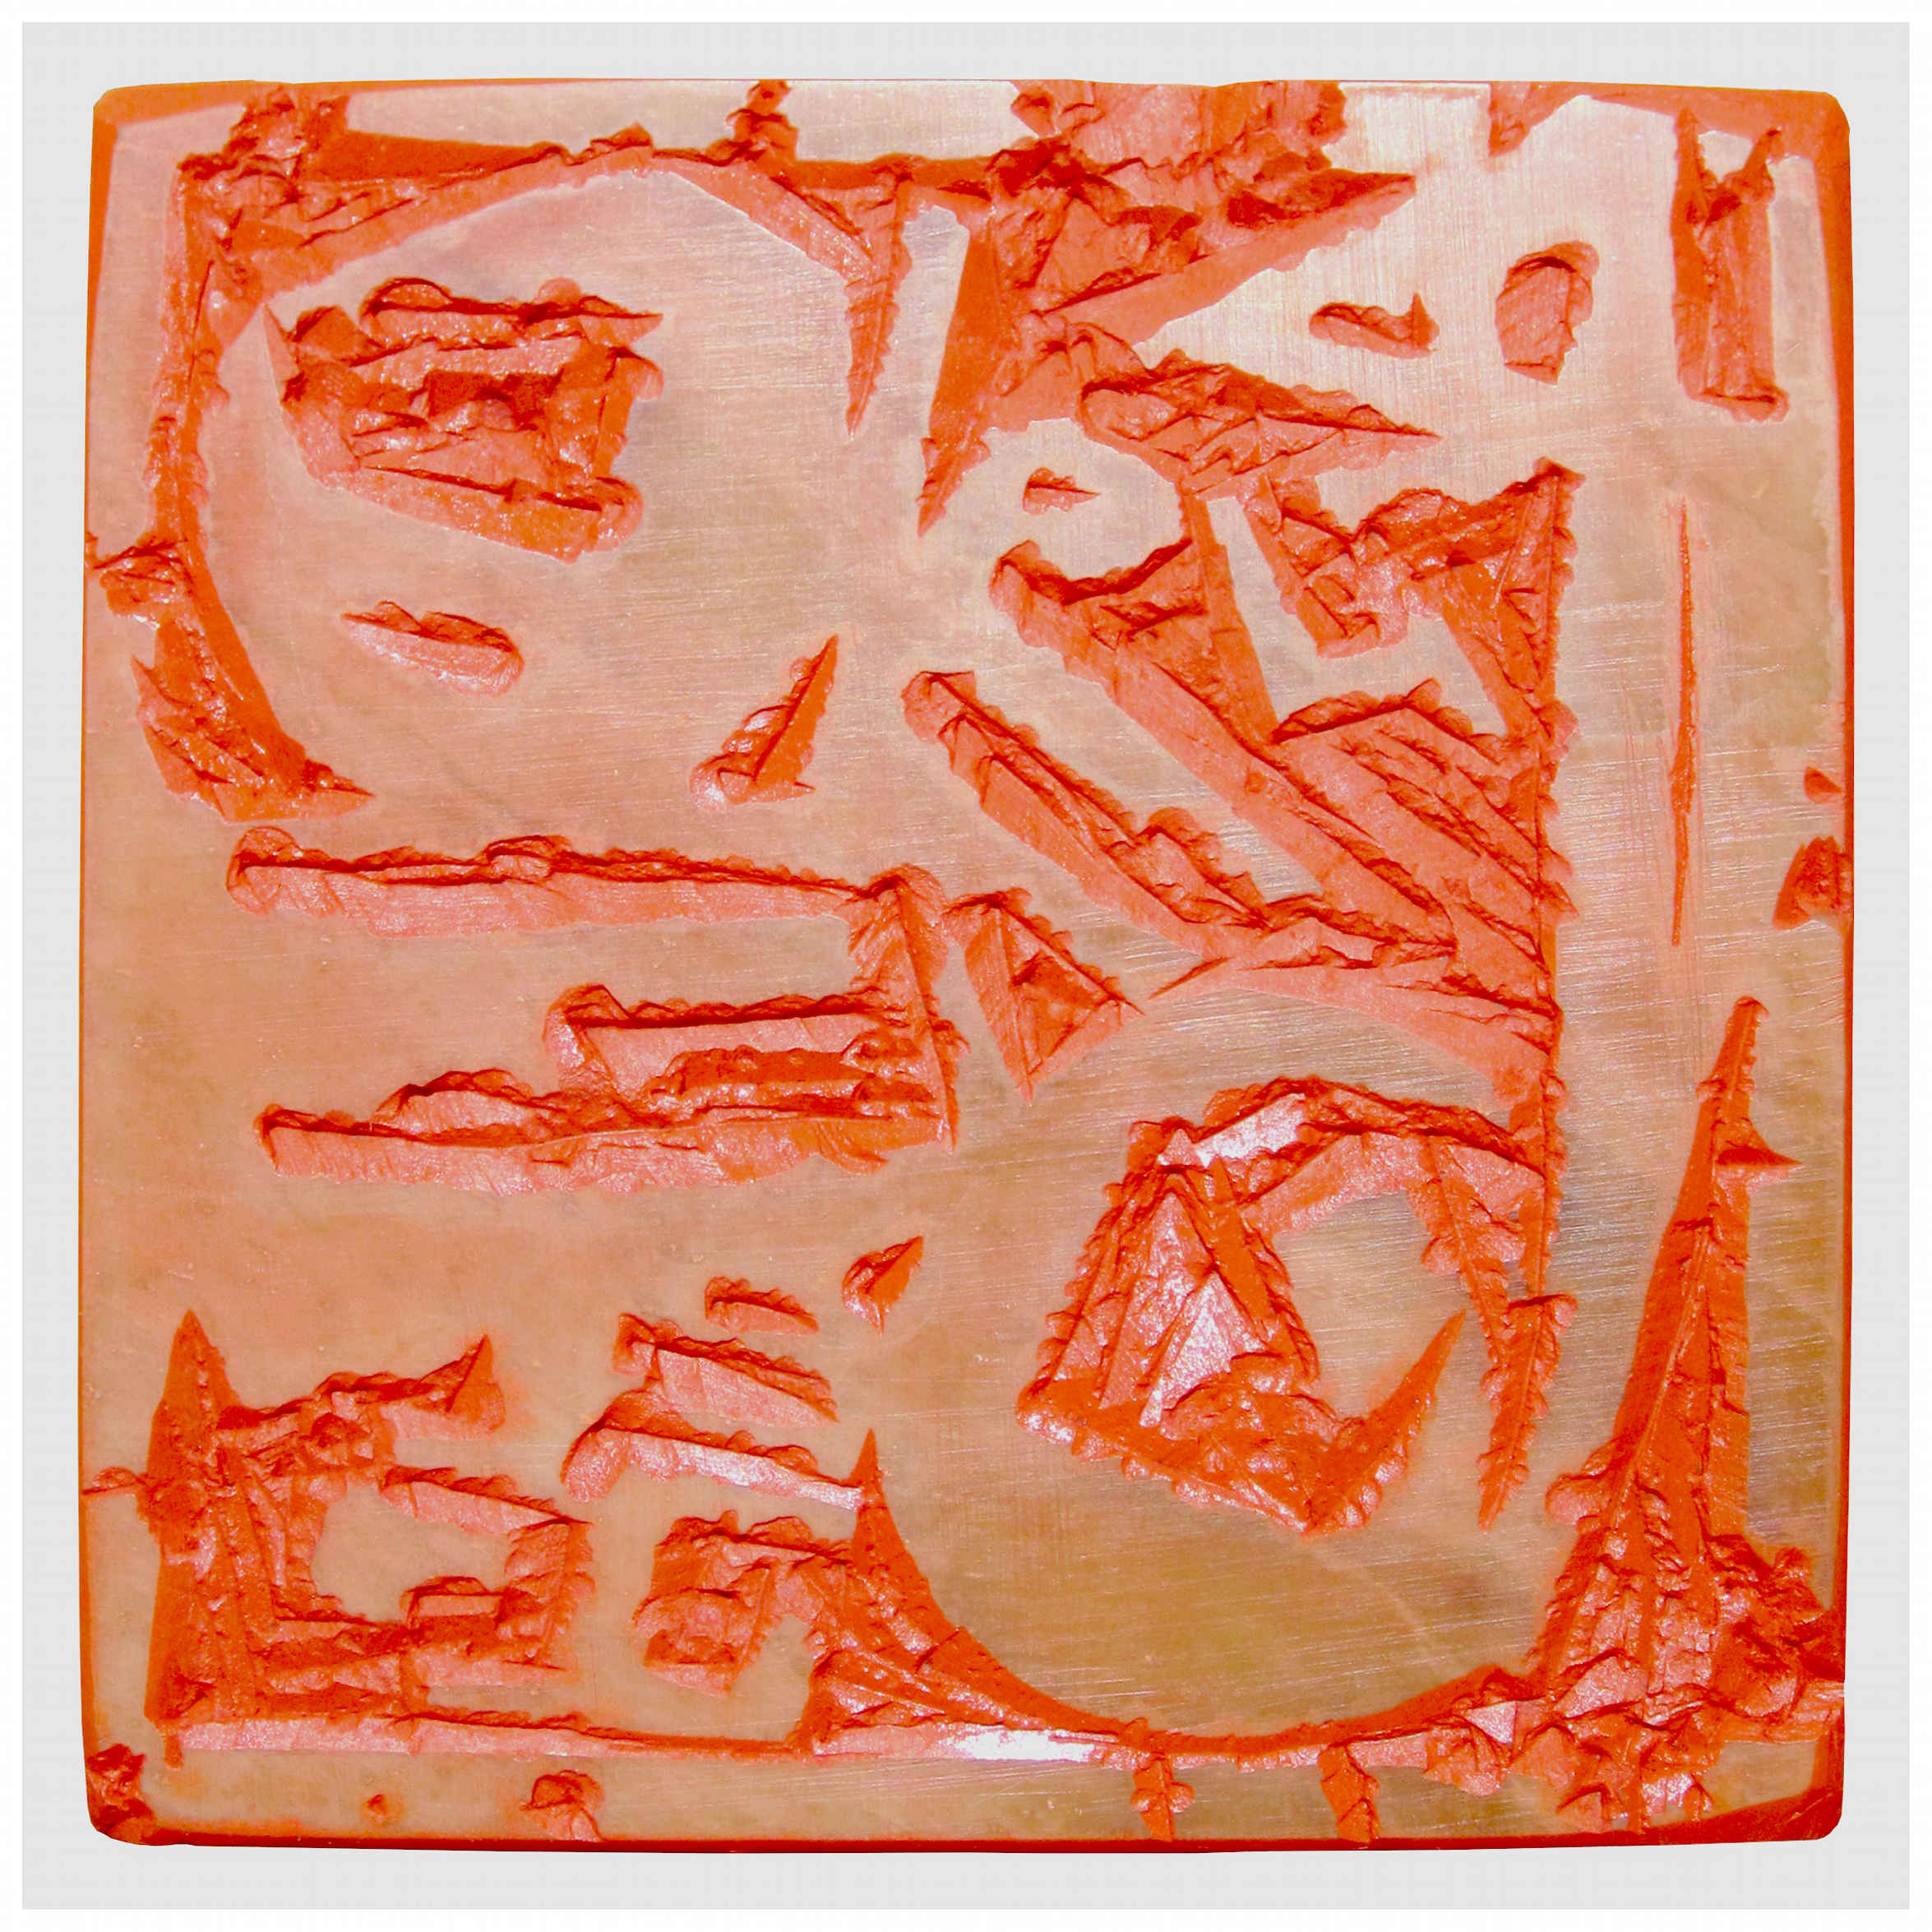 Sai Koh (Qi Hong)’s freehand brushwork Chinese seal carving (Chinese seal engraving, Chinese seal cutting) - The Active Qingtian Stone Surface Carved in Relief with Chinese Characters (Every Day is a Good Day), 140×140mm